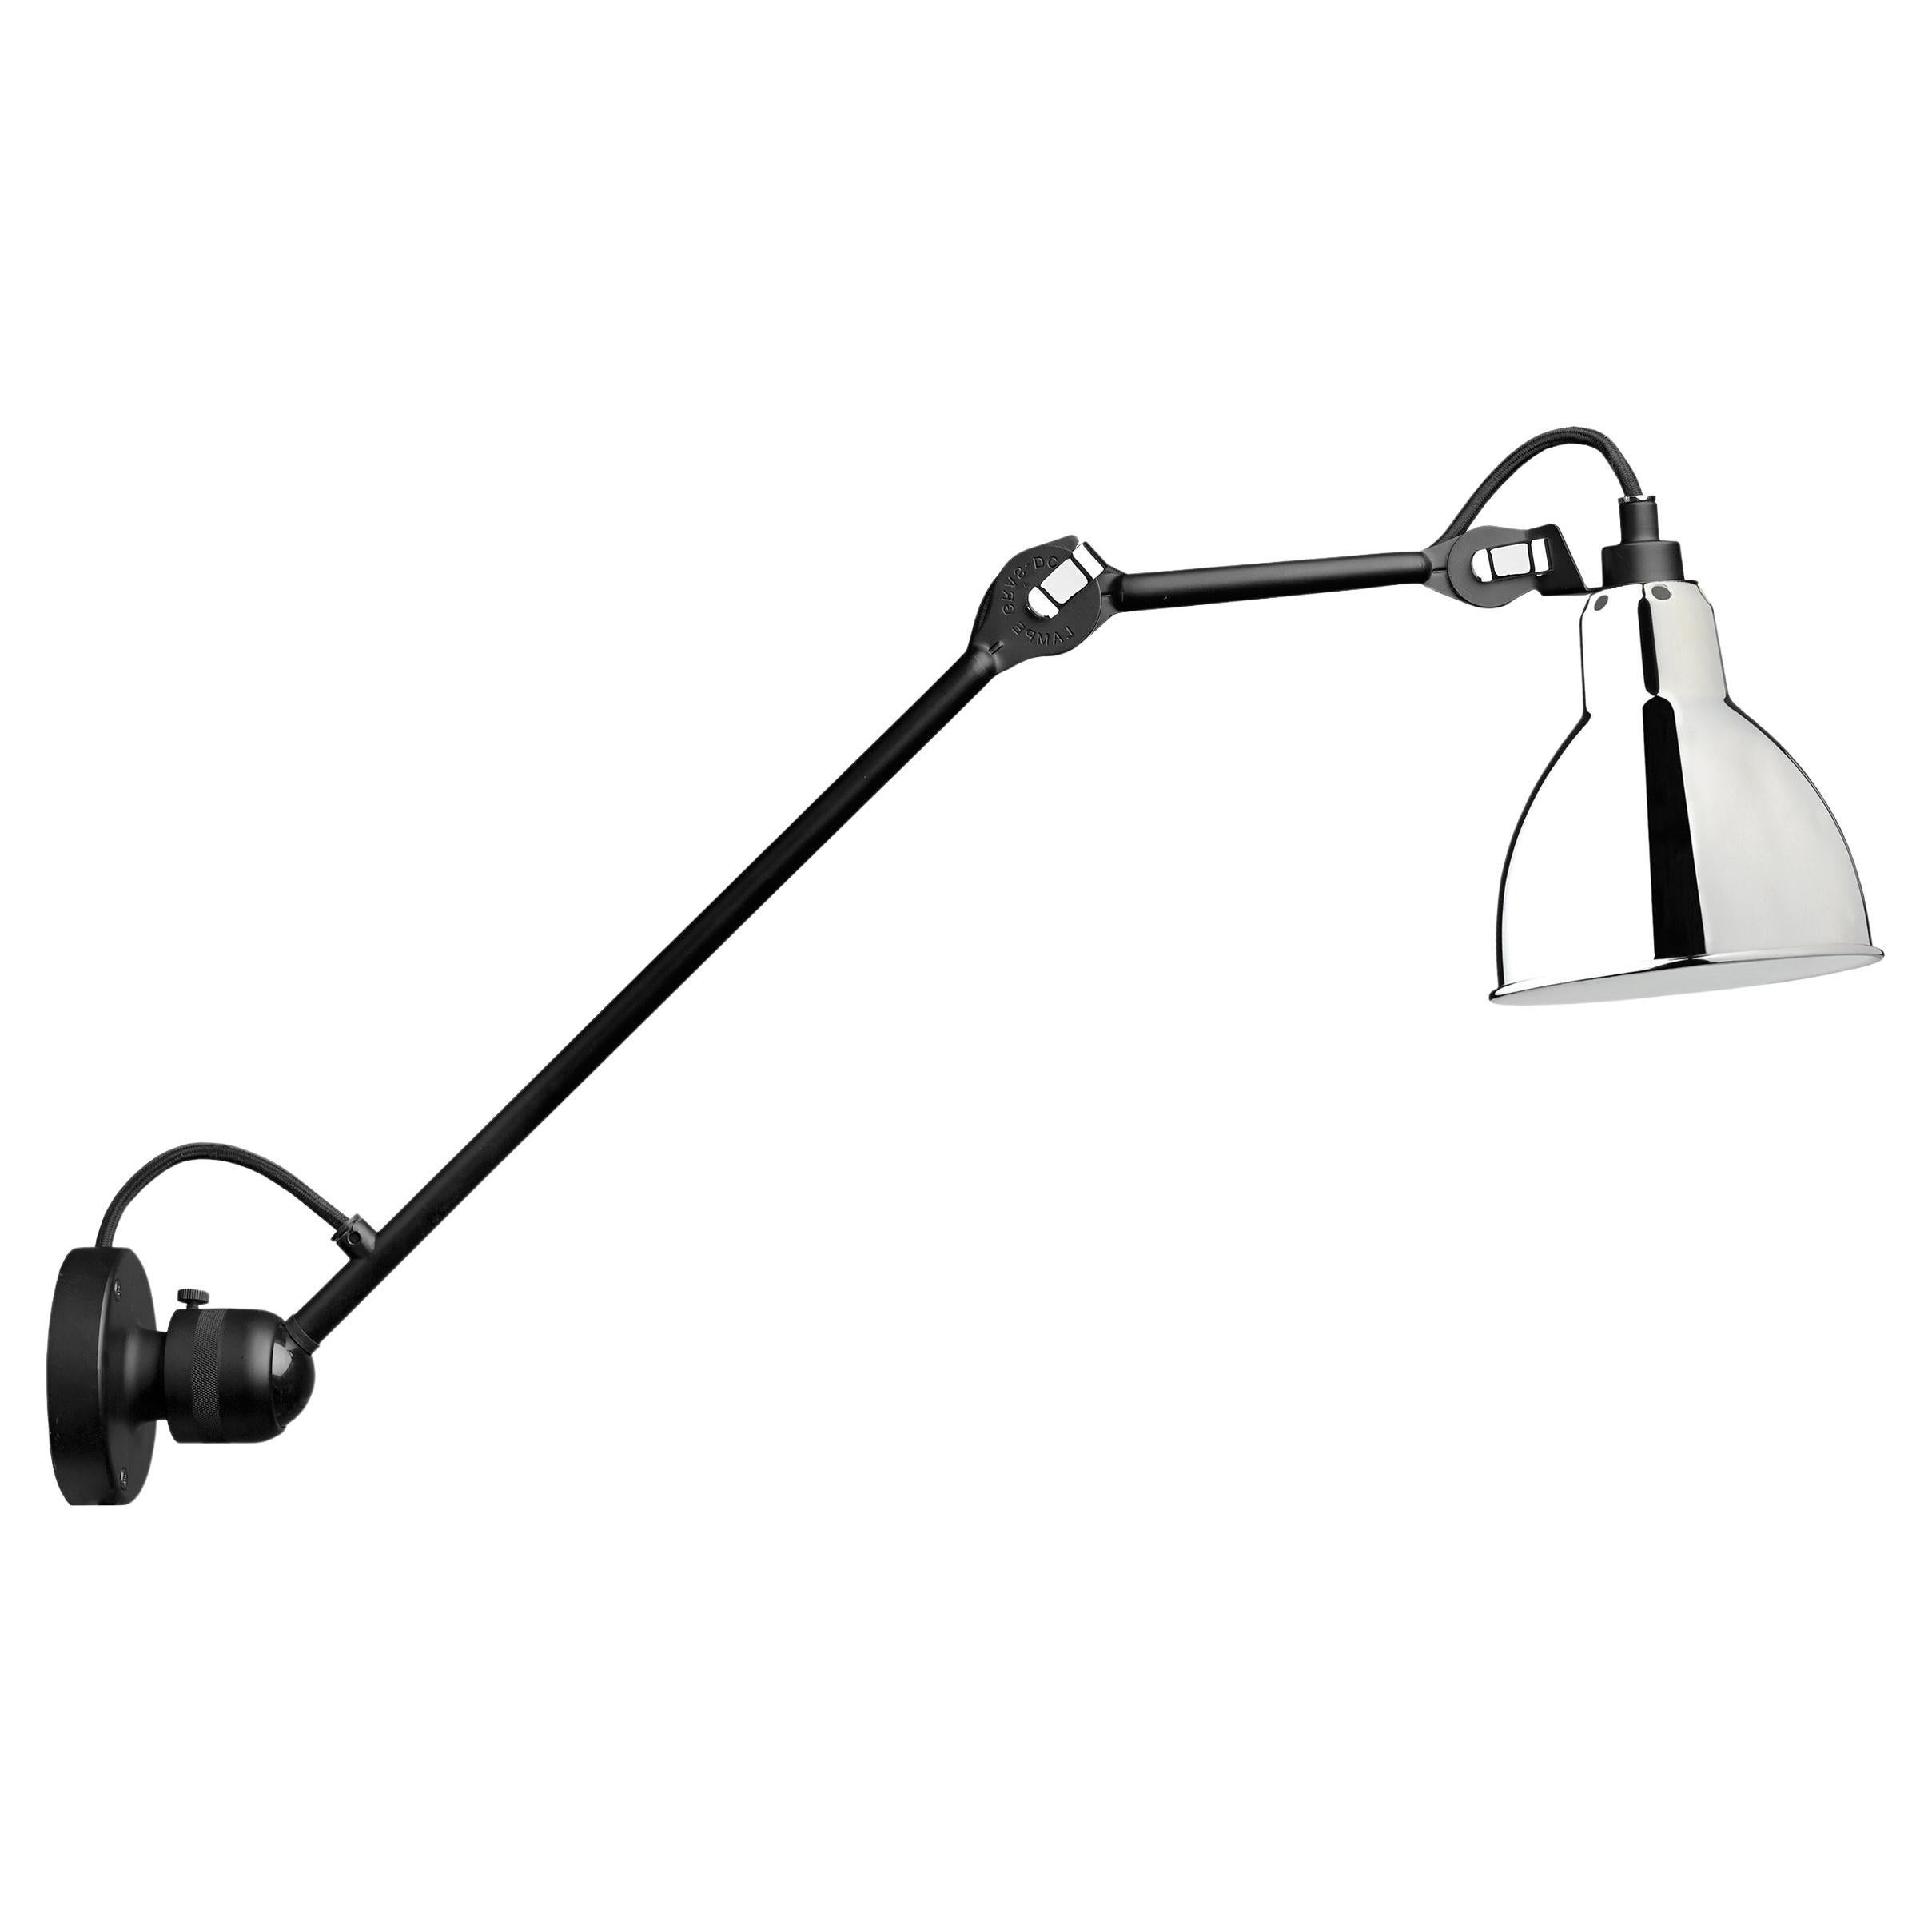 DCW Editions La Lampe Gras N°304 L40 Wall Lamp in Black Arm and Chrome Shade For Sale